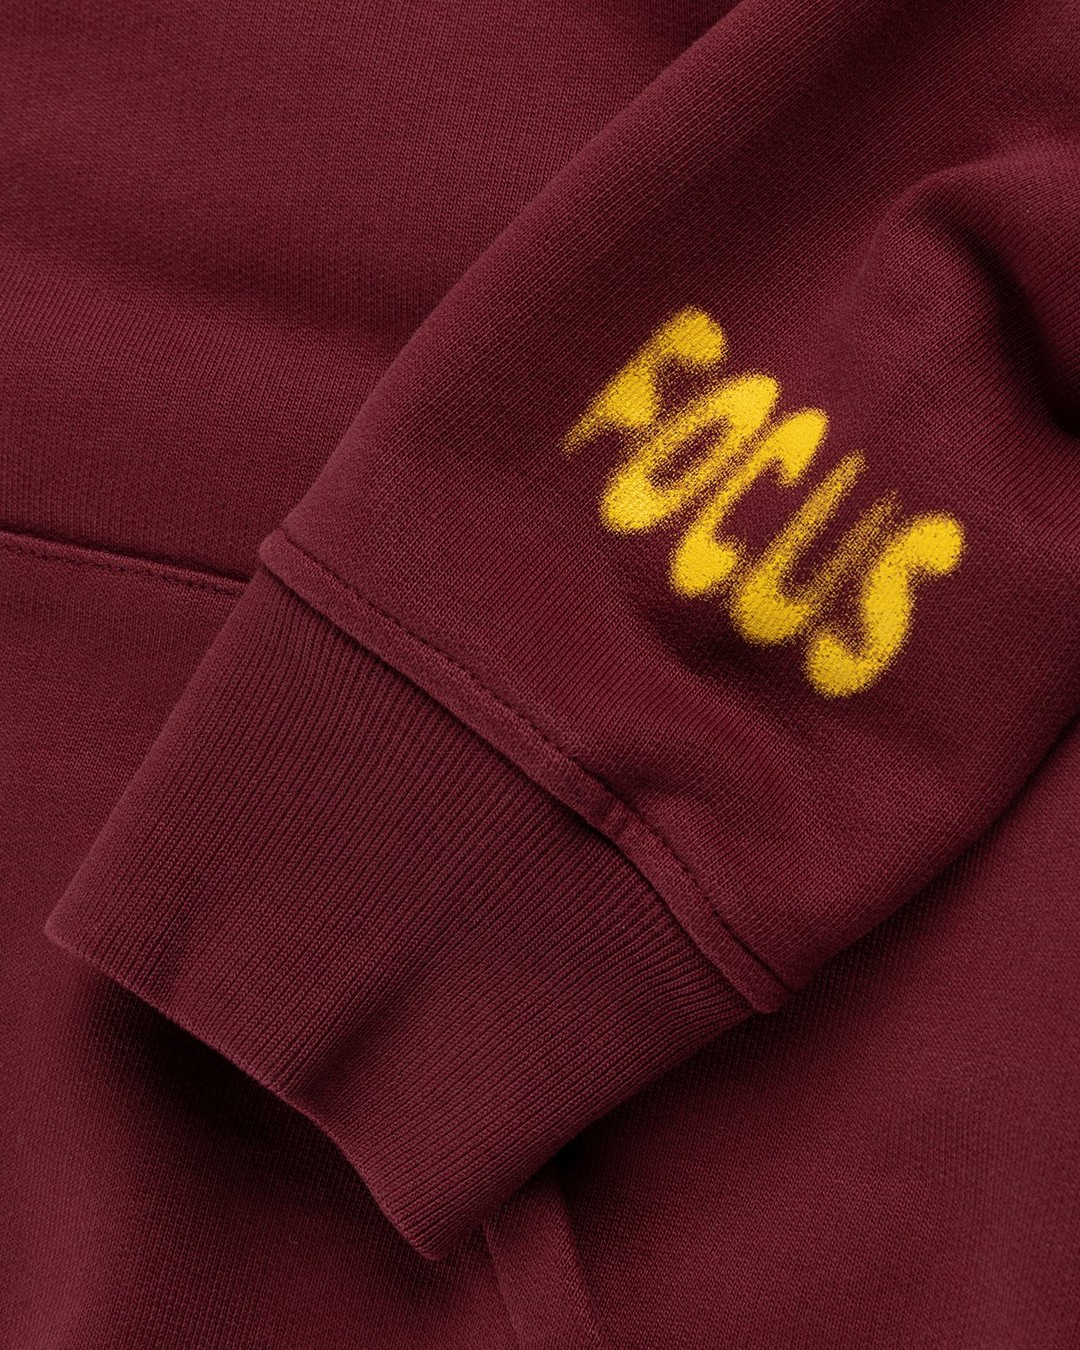 Highsnobiety – HS Sports Focus Hoodie Bordeaux - Sweats - Red - Image 6